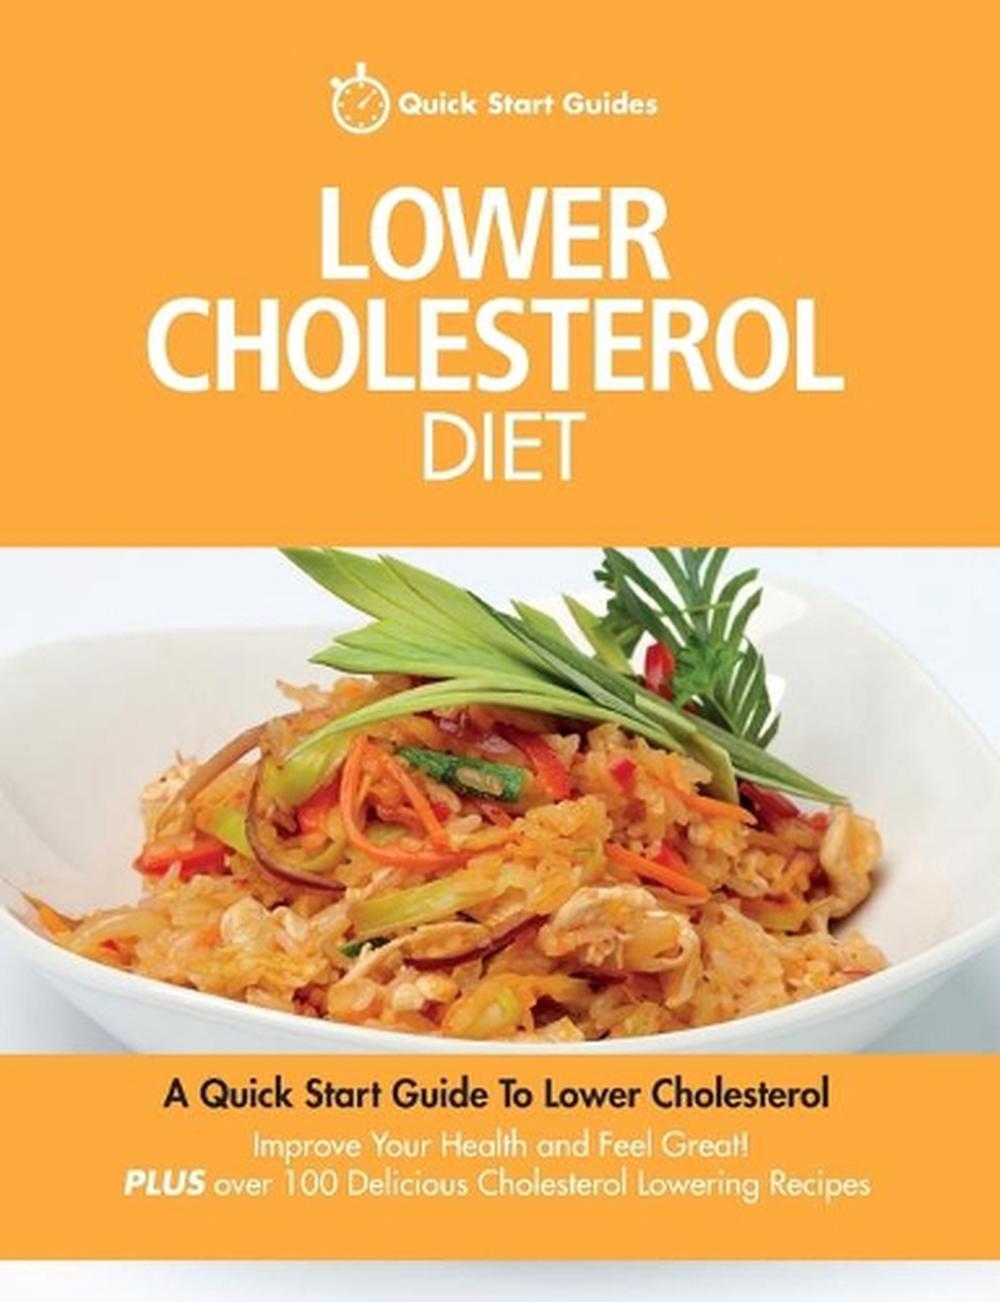 Lower Cholesterol Diet by Quick Start Guides (English) Paperback Book